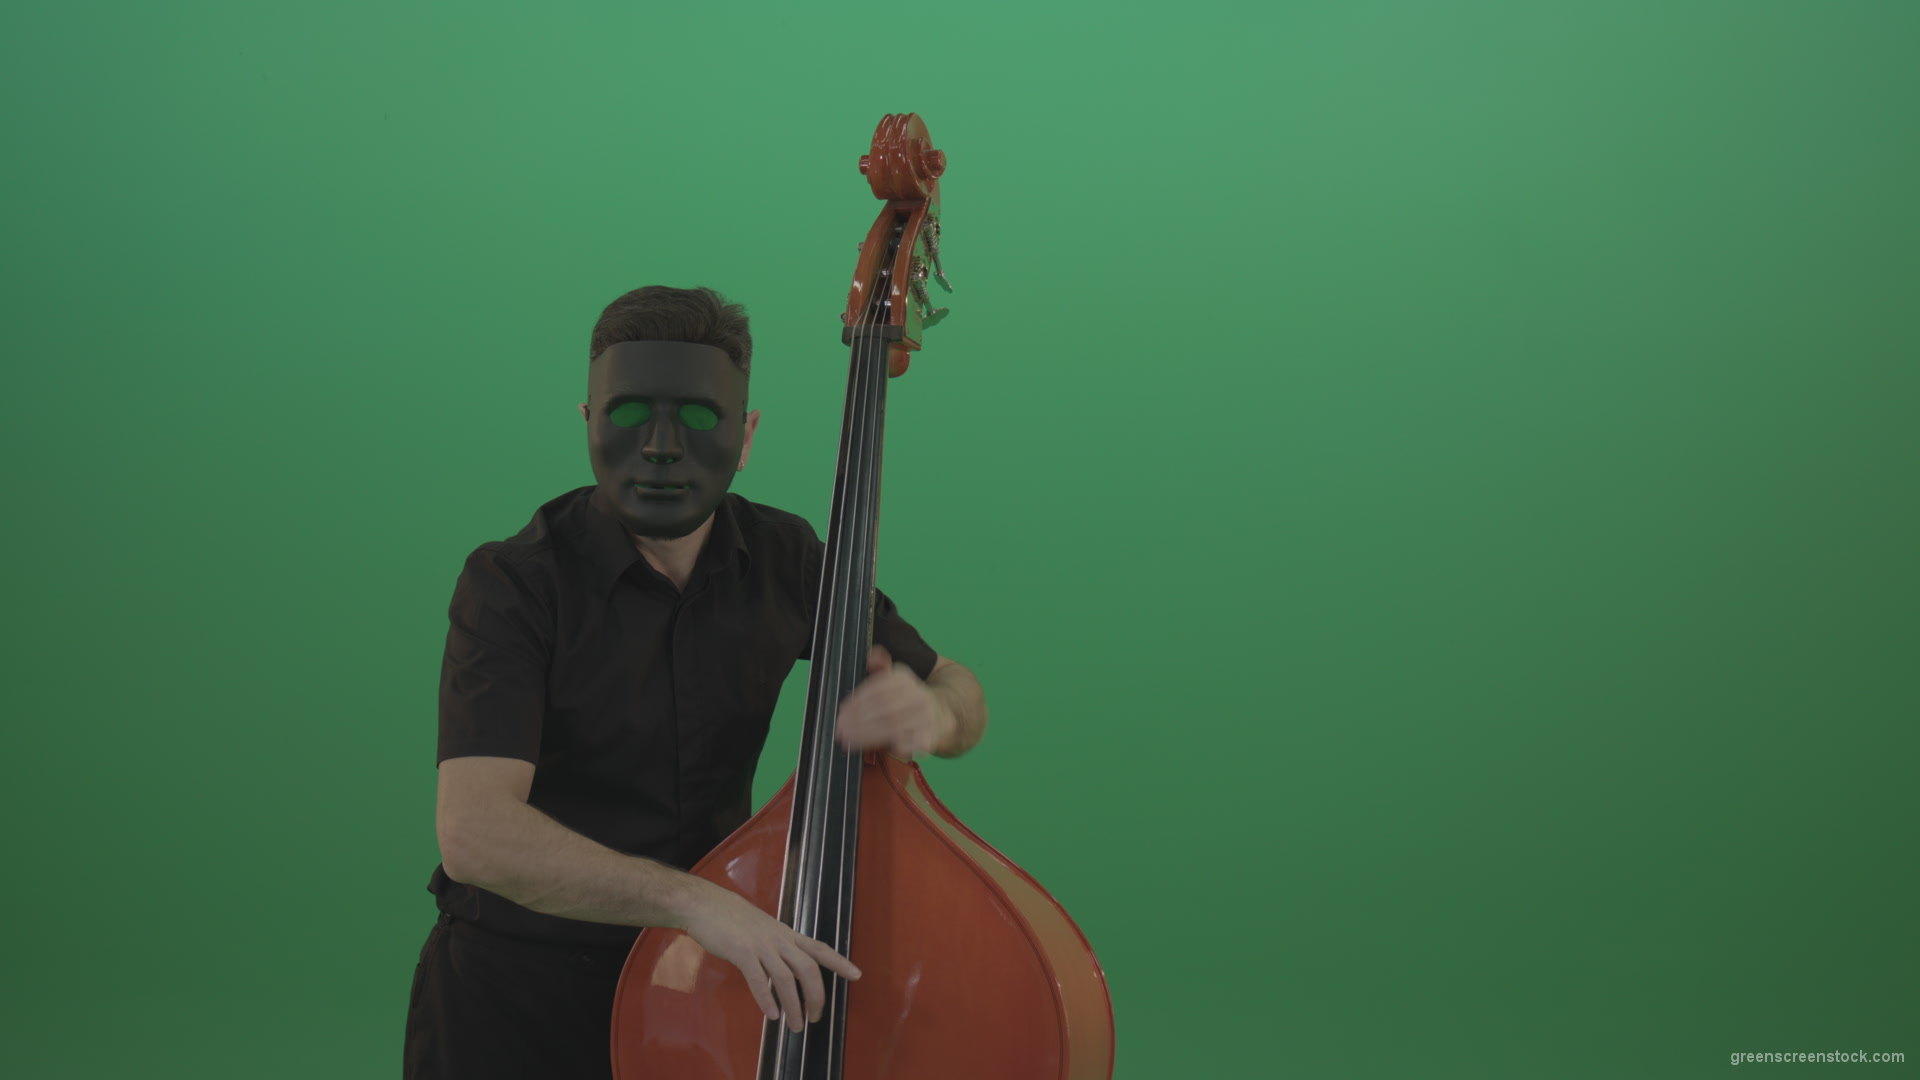 Man-in-black-mask-with-green-eyes-play-music-on-double-bass-instrument-isolated-on-green-screen_007 Green Screen Stock